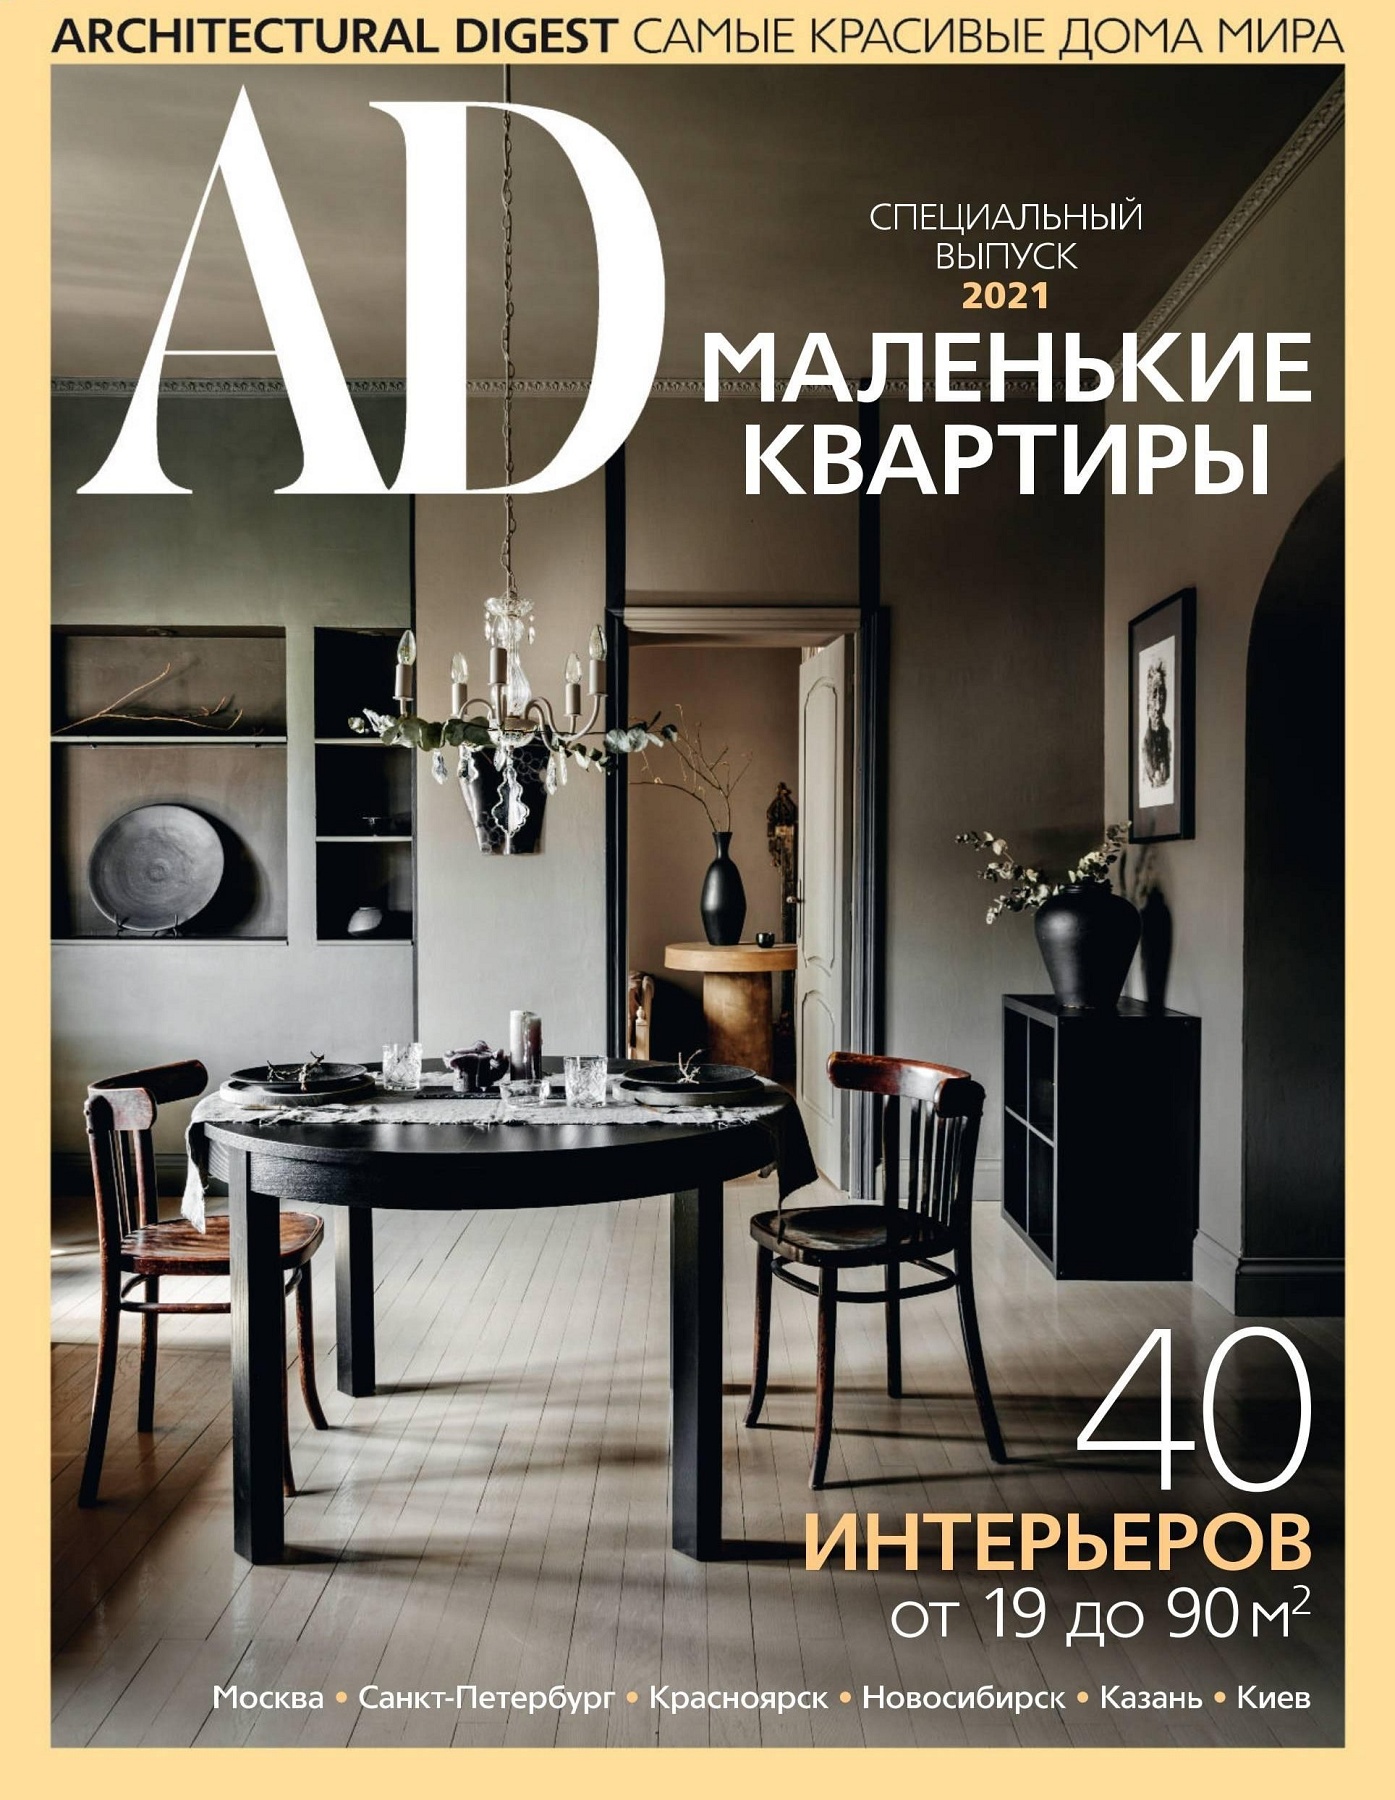 AD. Architectural Digest.    2021